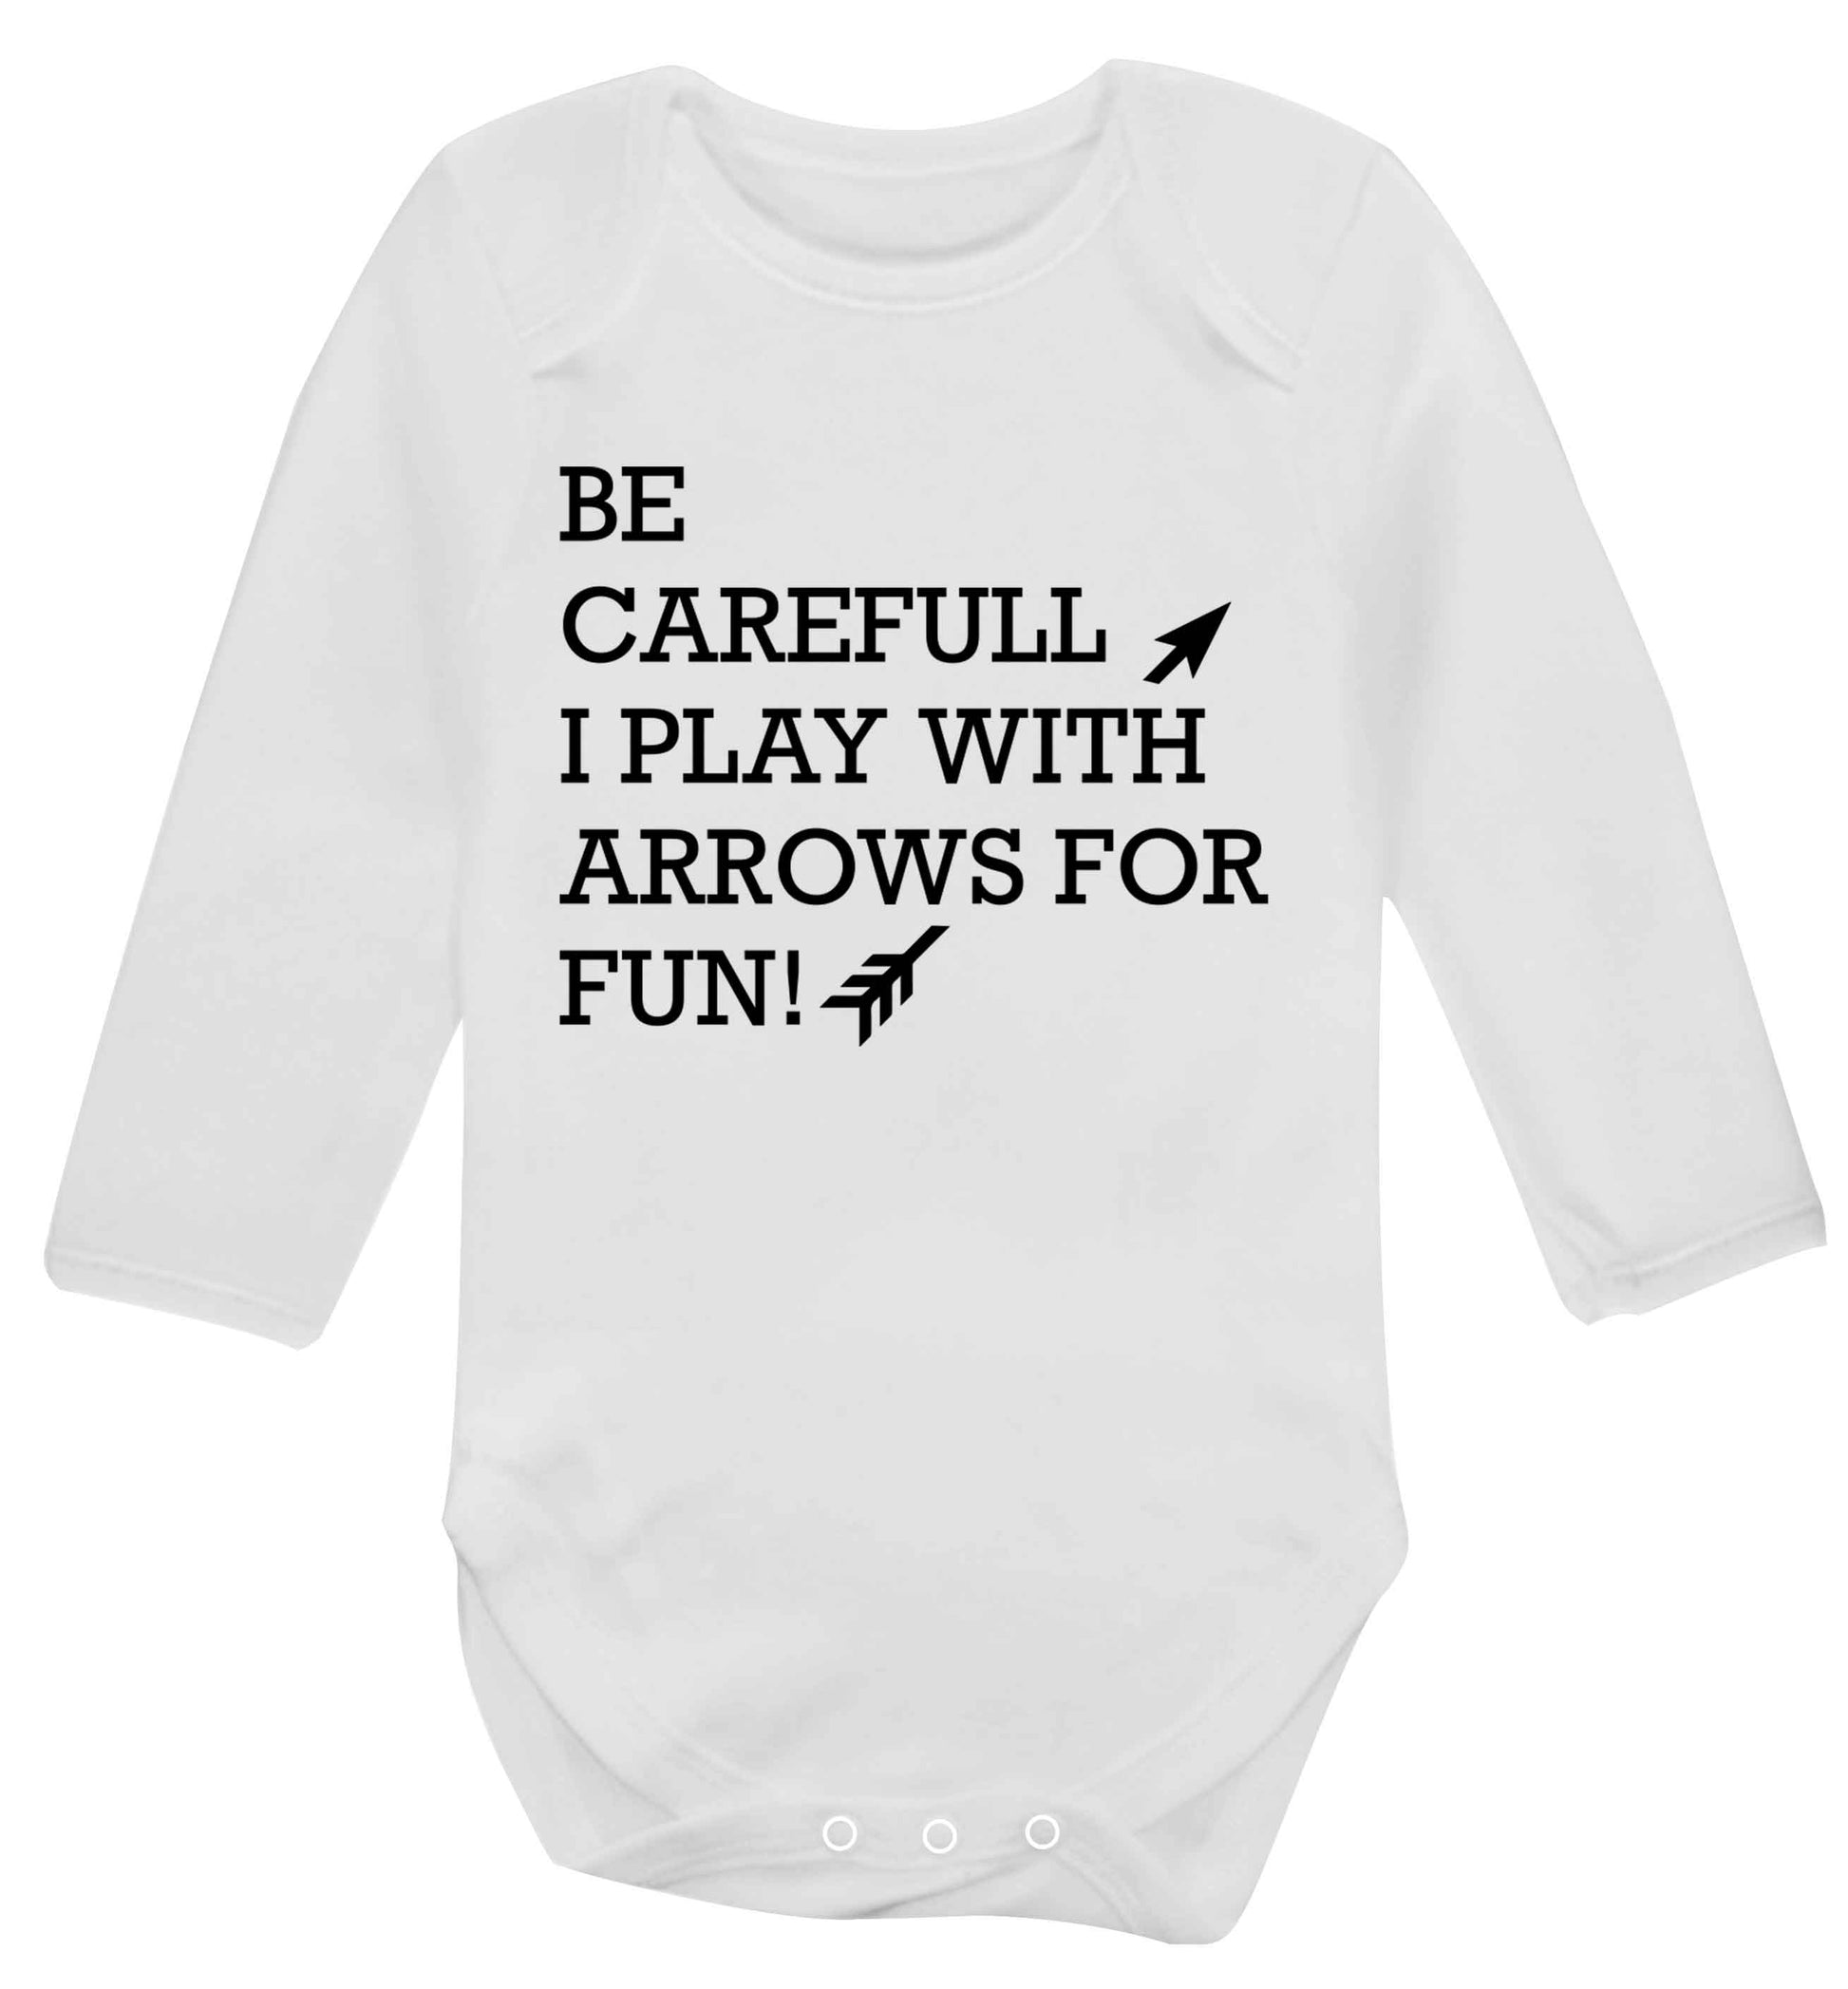 Be carefull I play with arrows for fun Baby Vest long sleeved white 6-12 months